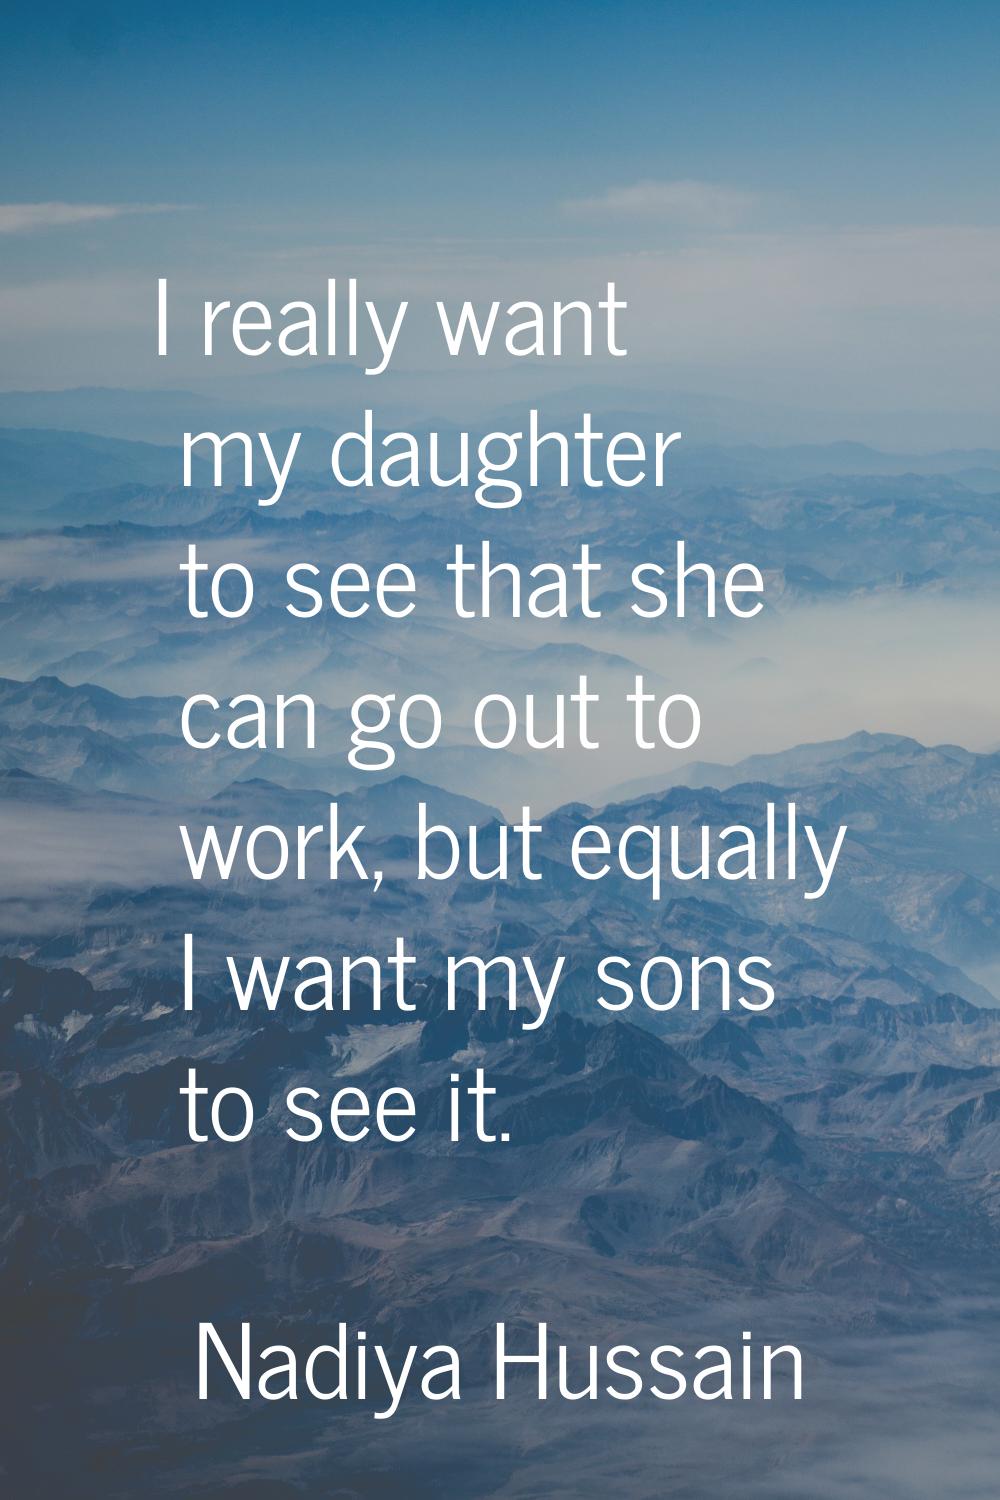 I really want my daughter to see that she can go out to work, but equally I want my sons to see it.